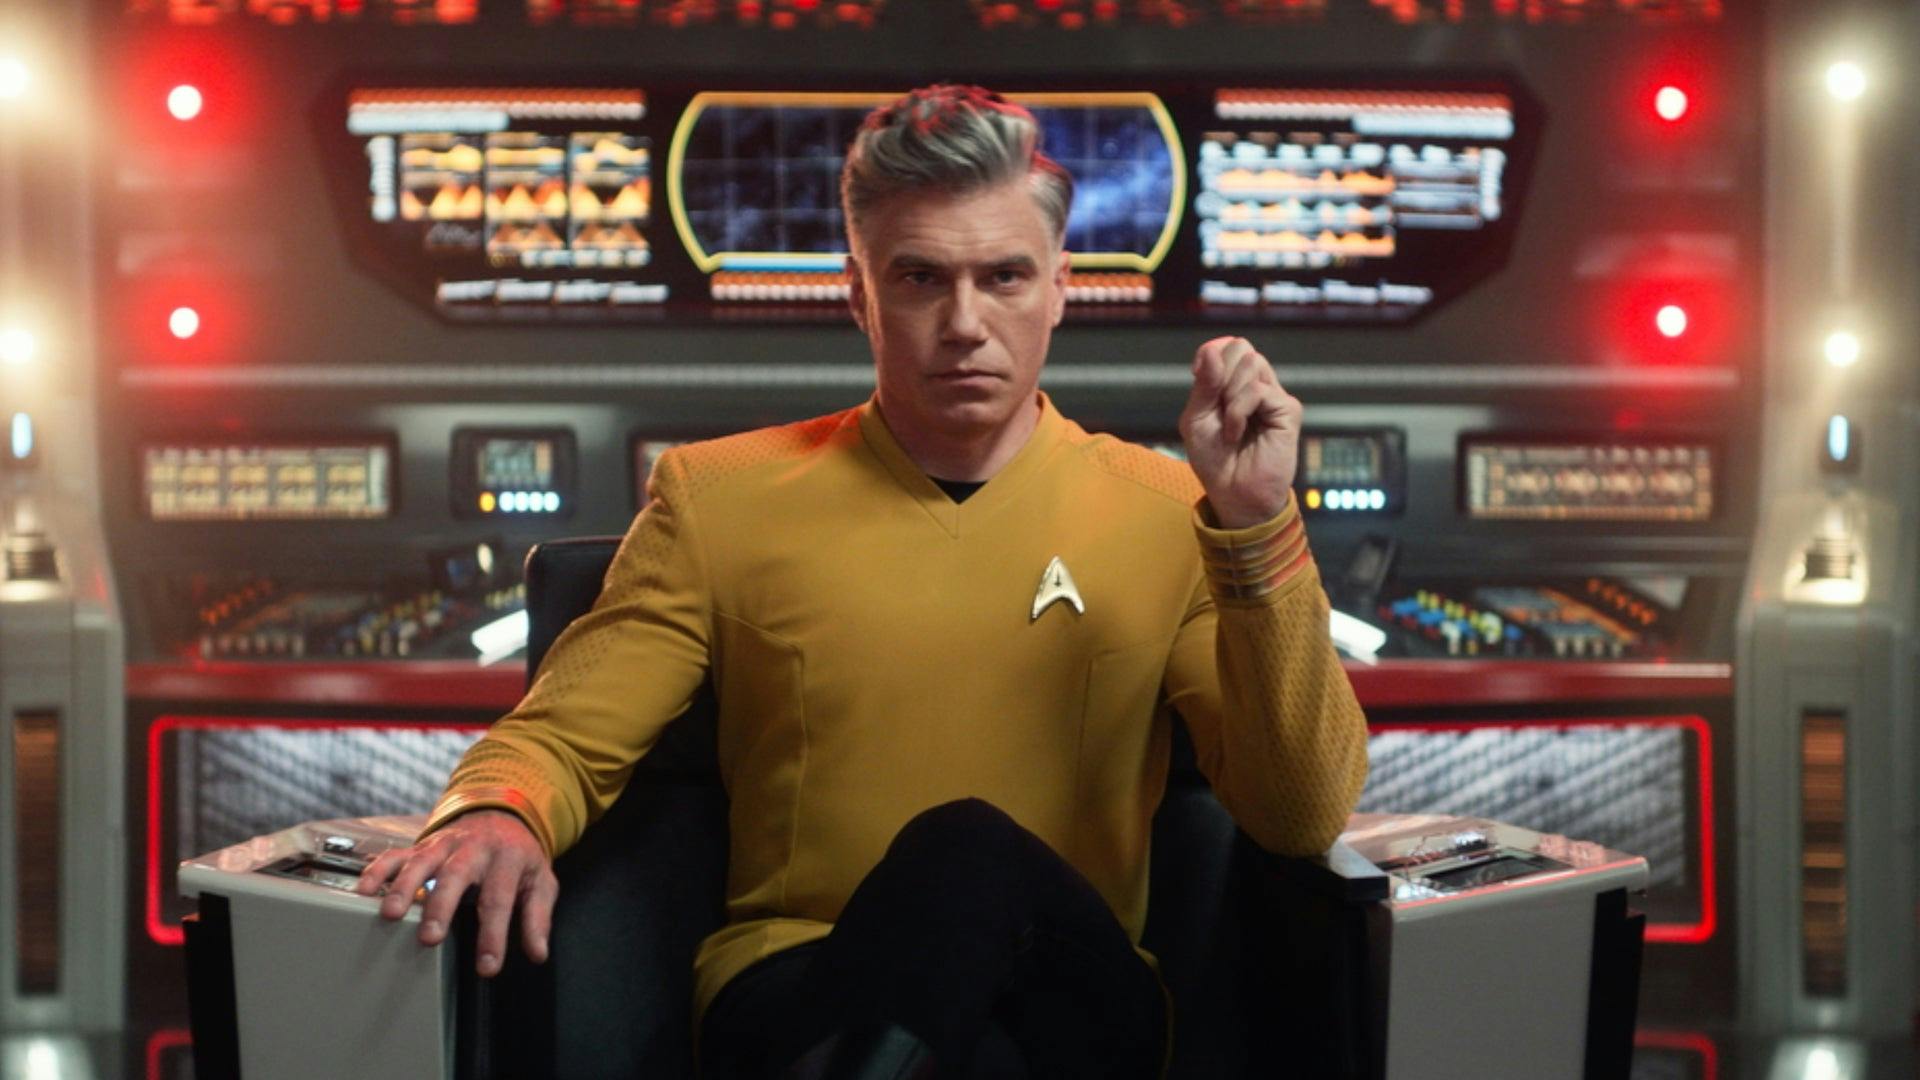 Captain Pike (Anson Mount) sits ready for action on the bridge of the Enterprise.